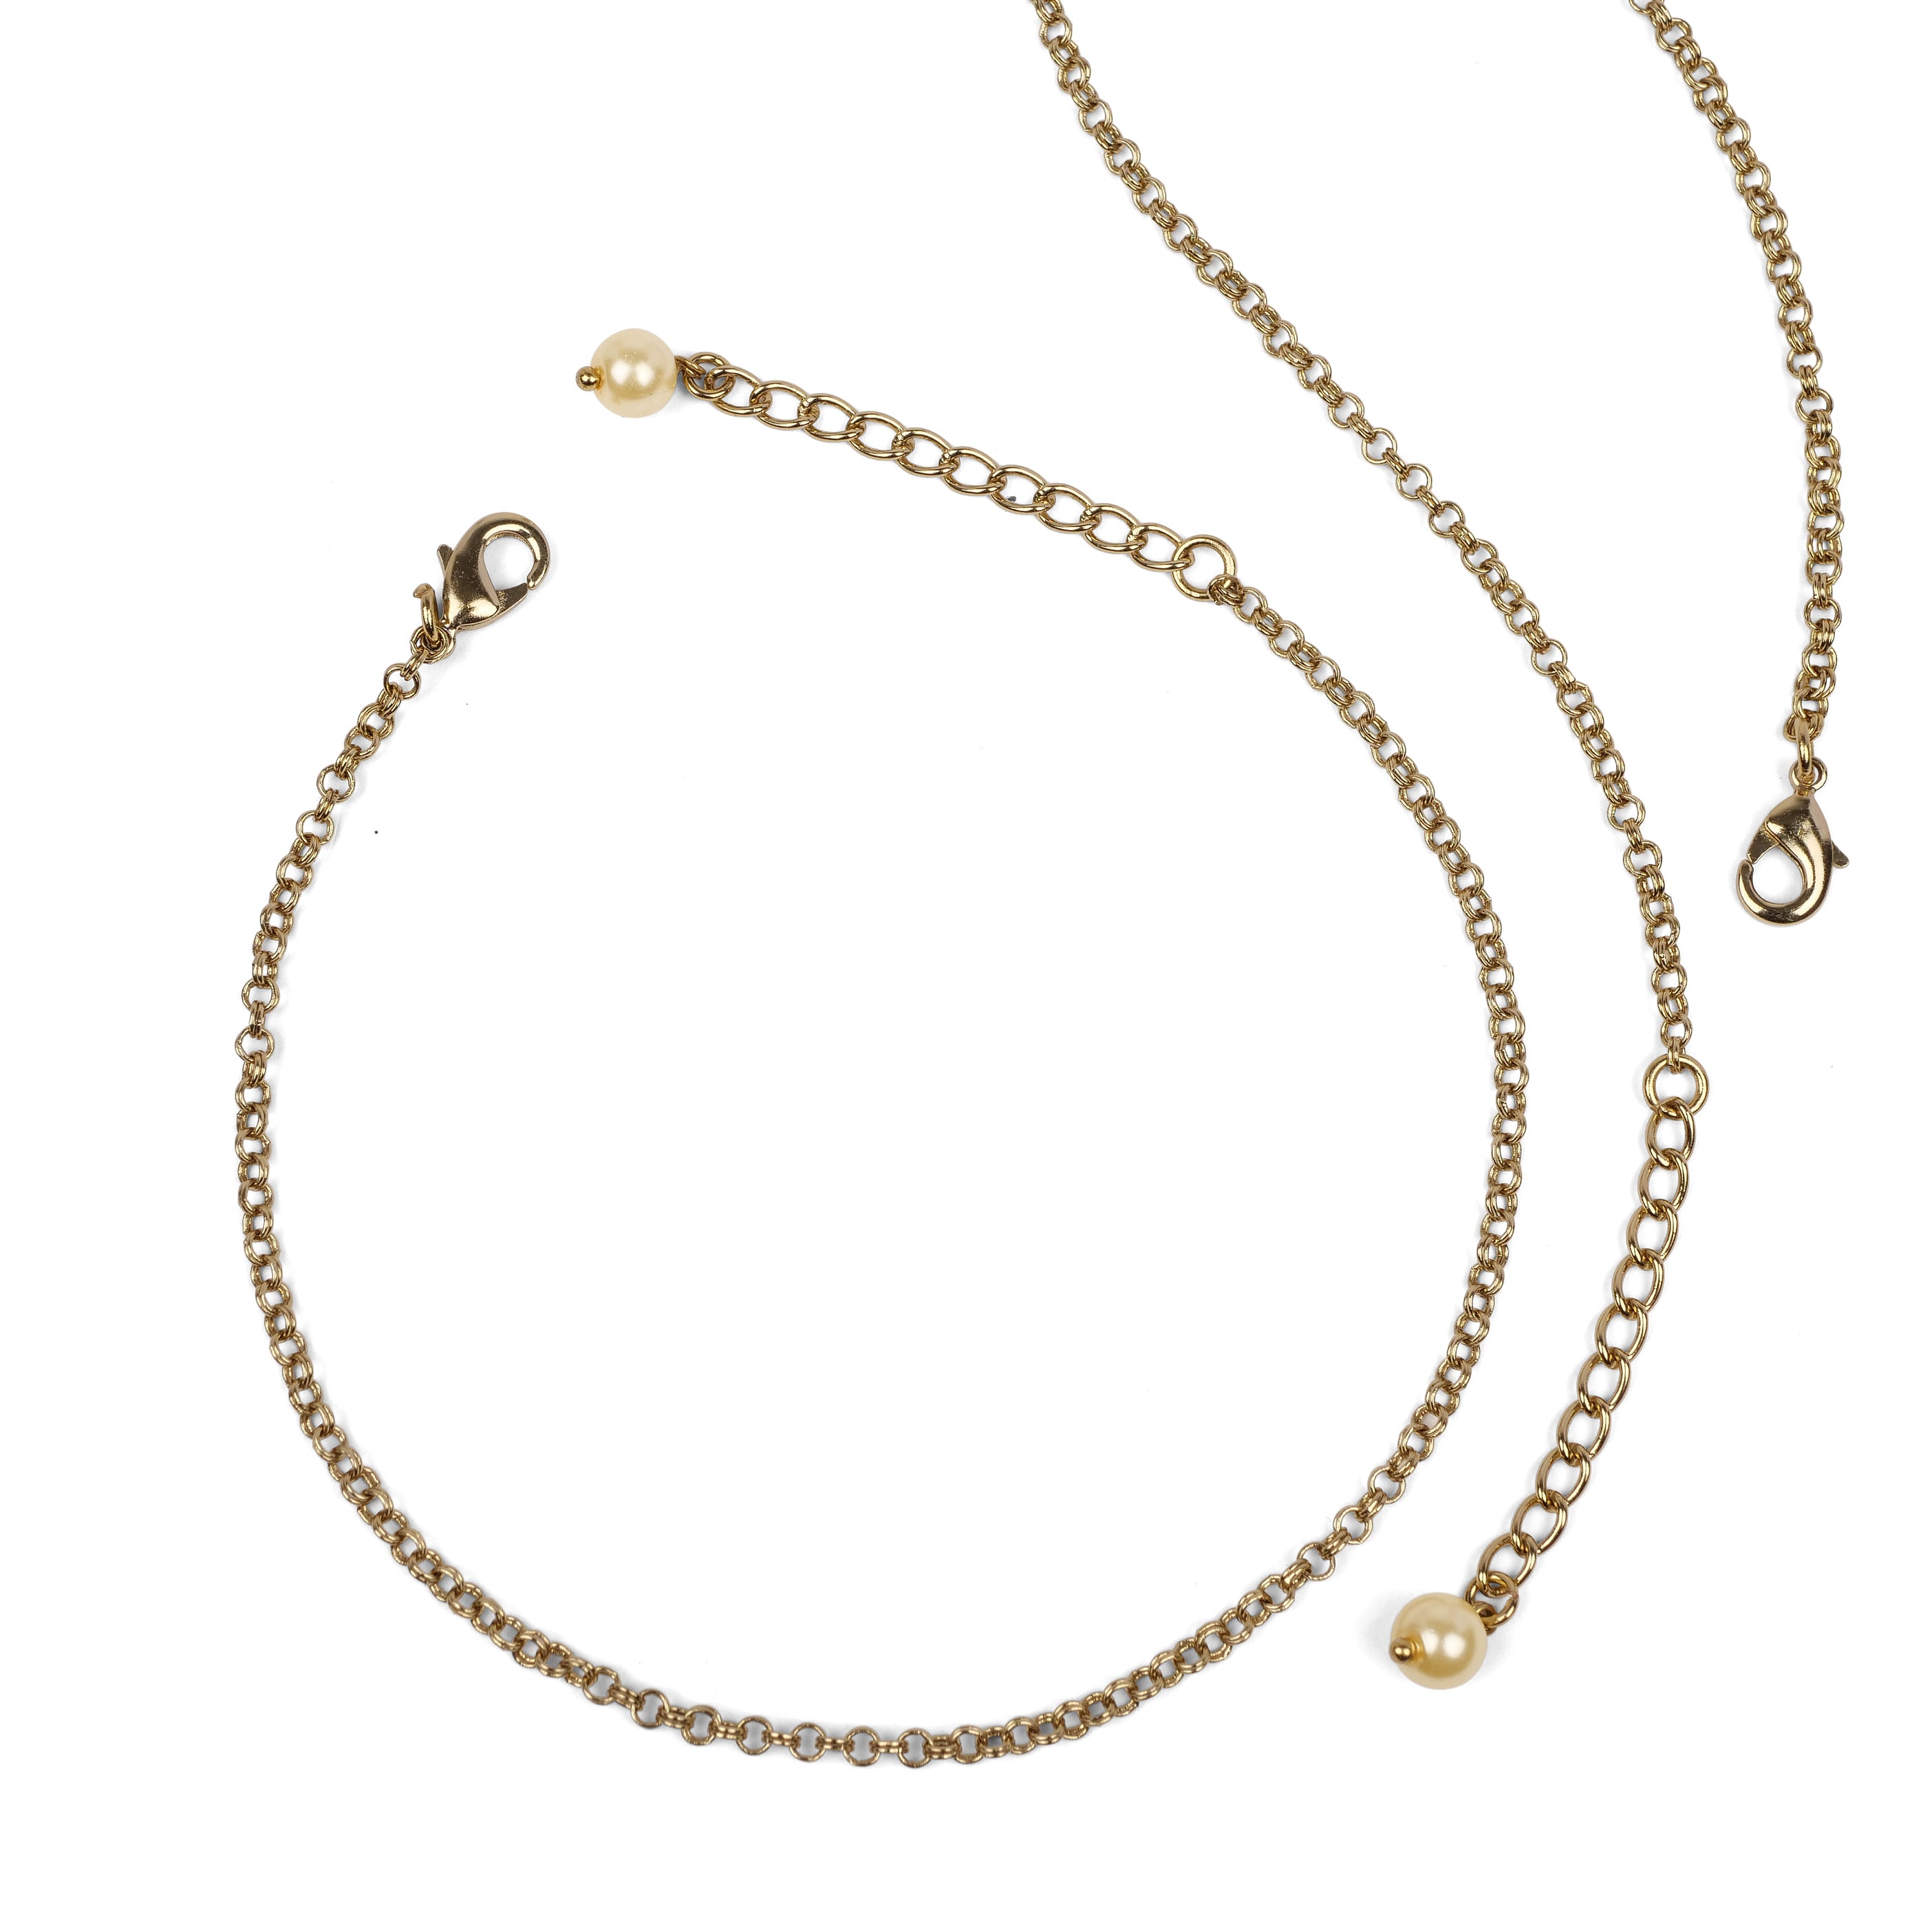 Imani Antique Gold Chain Anklets